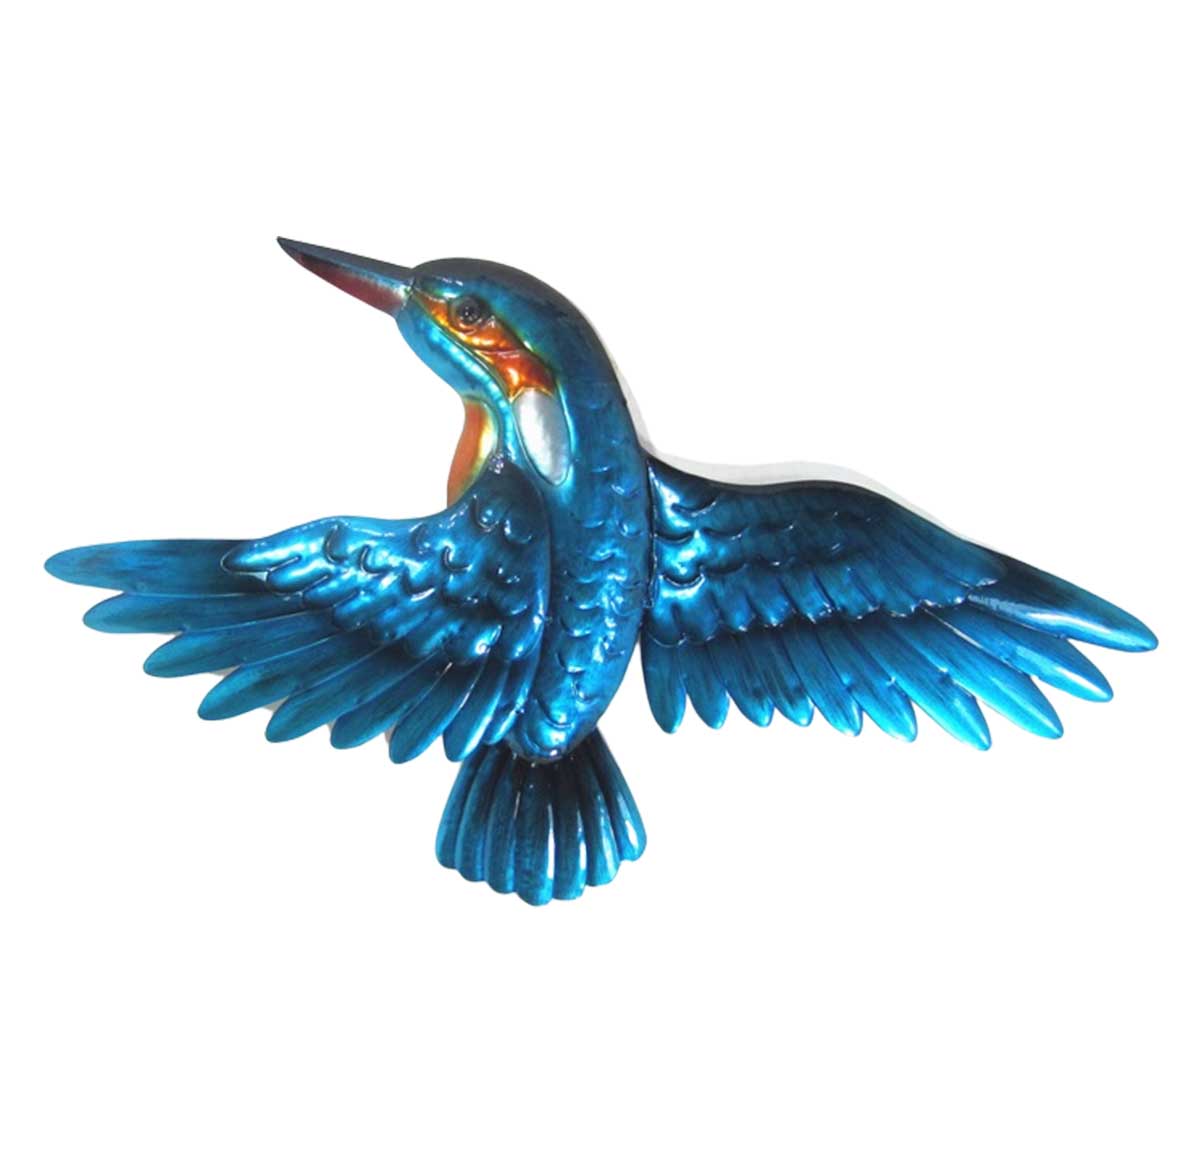 Kingfisher In Flight Metal Art Wall Hanging - blue | Home Decor | Mish Lifestyle